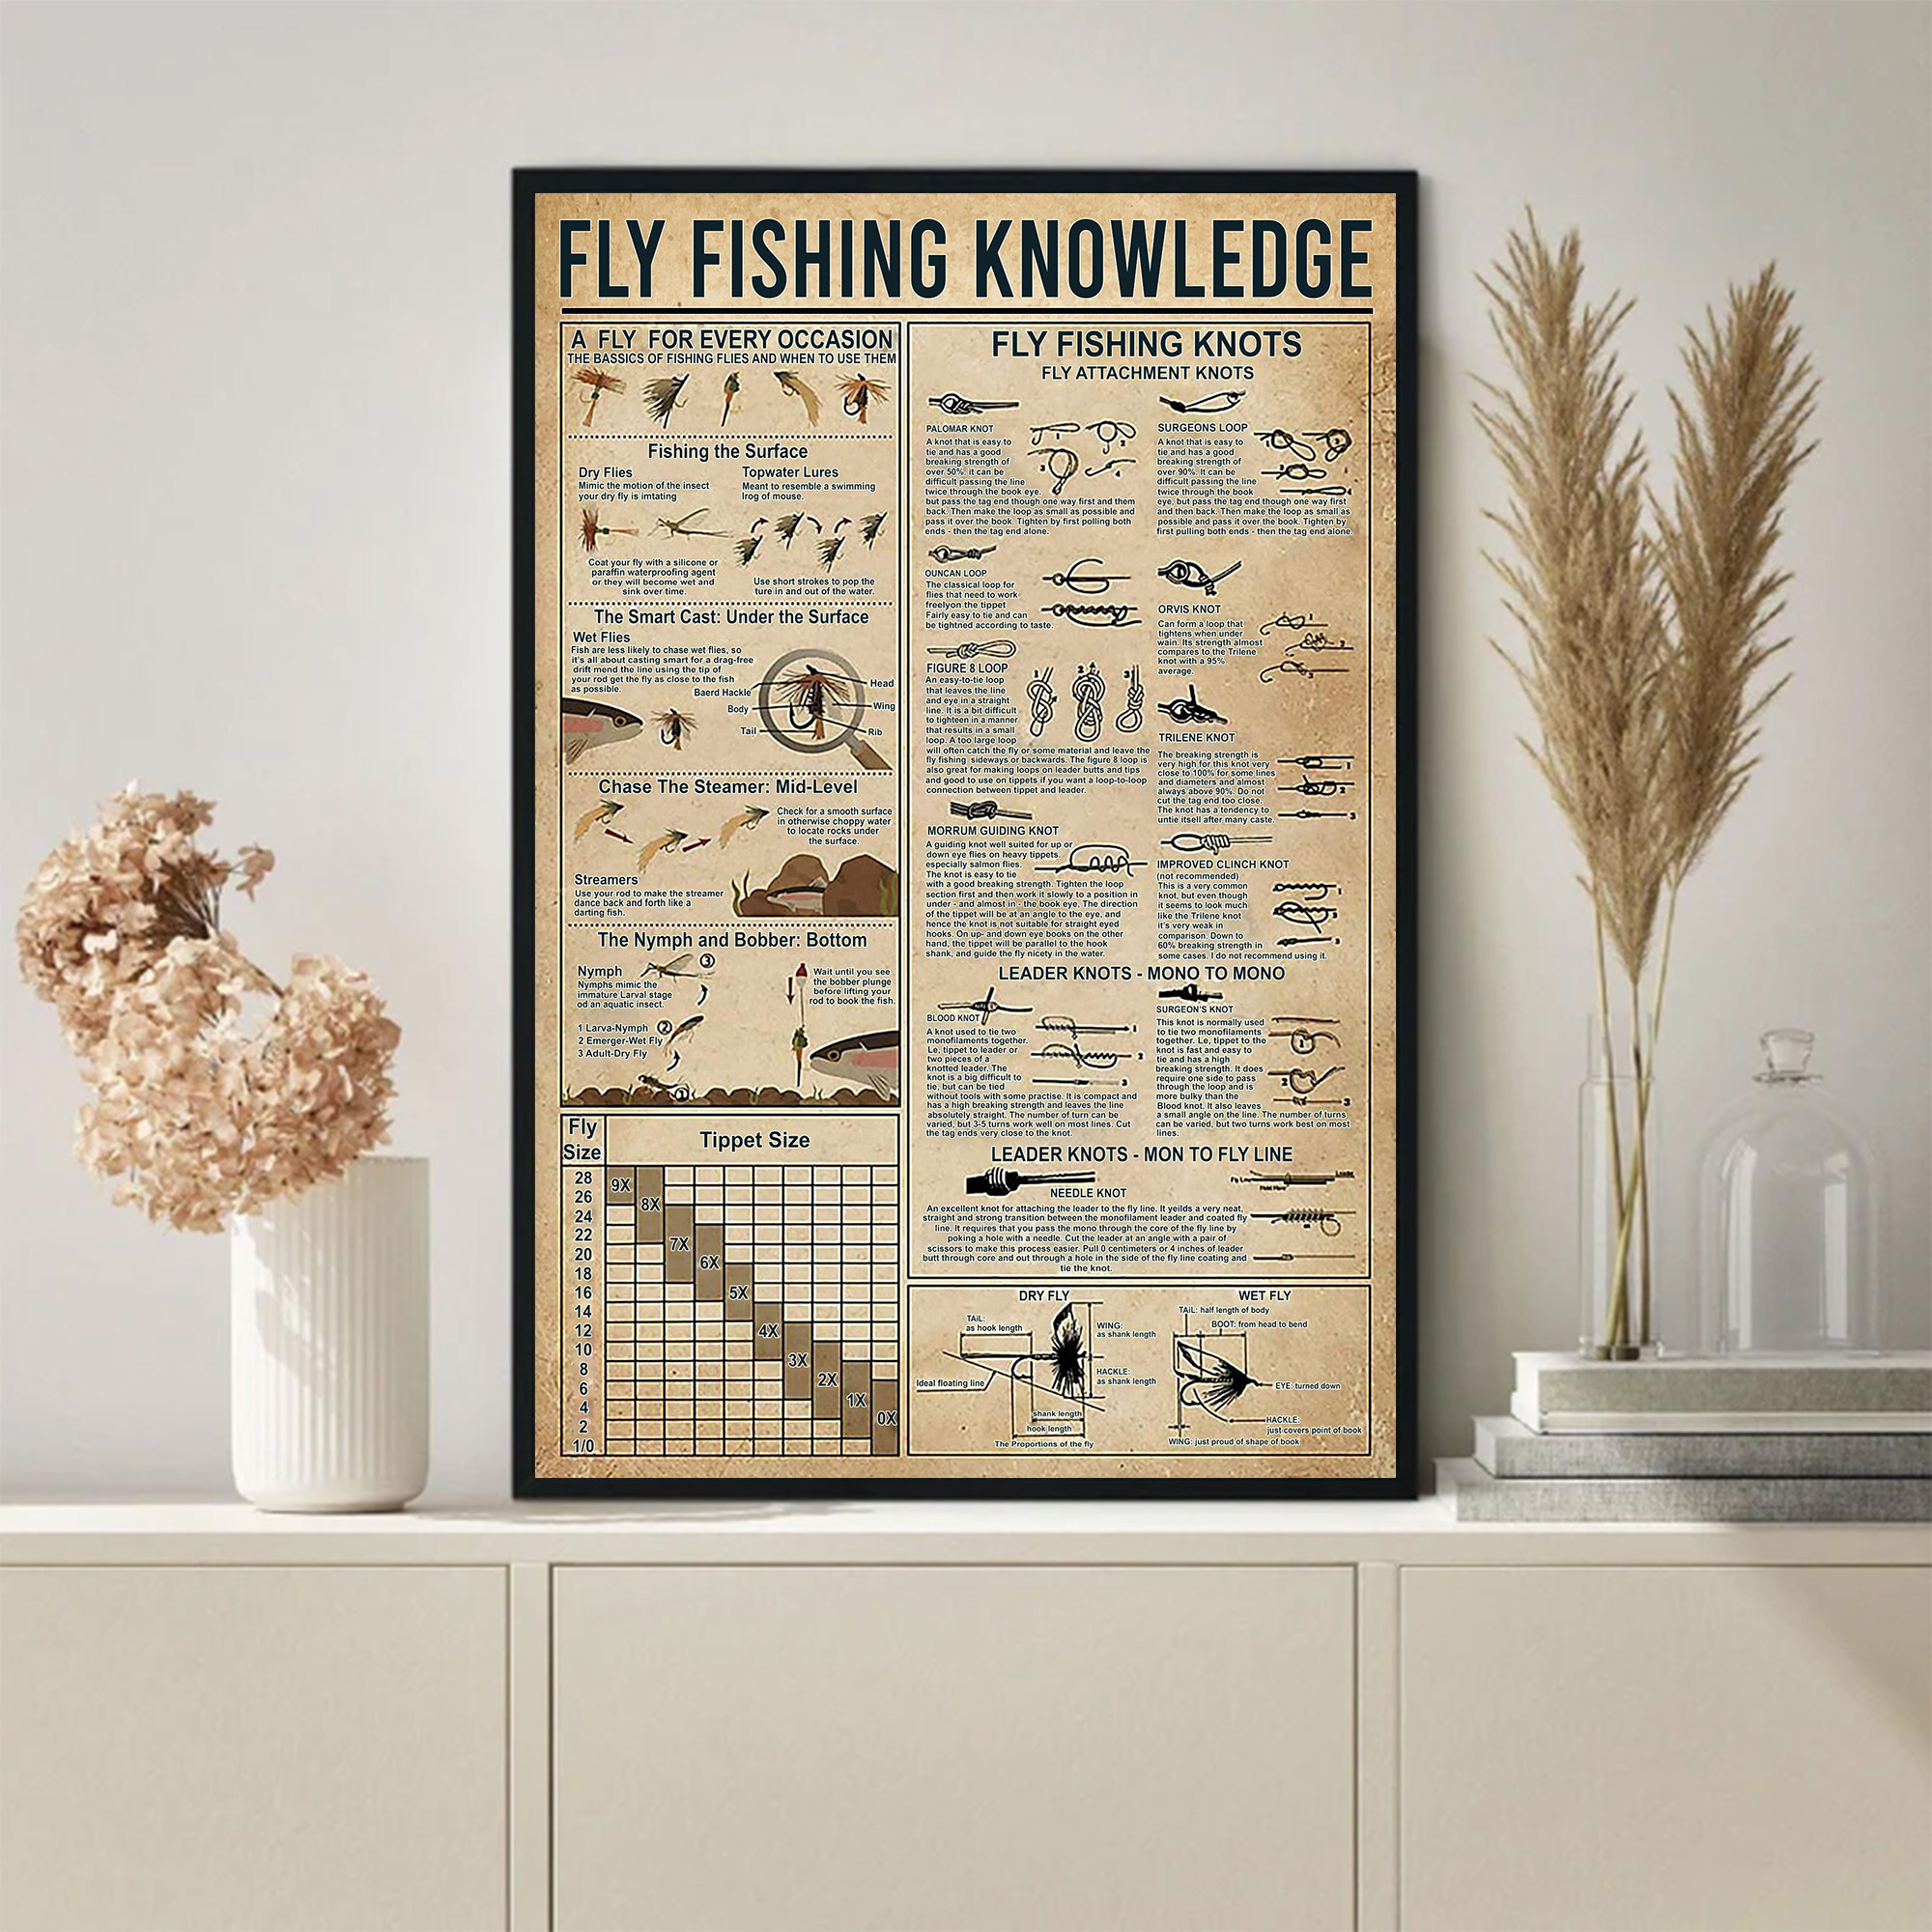 Fly Fishing Know Ledge Poster, Knowledge Poster, Vintage Poster Wall Art,  Home Decor DK066